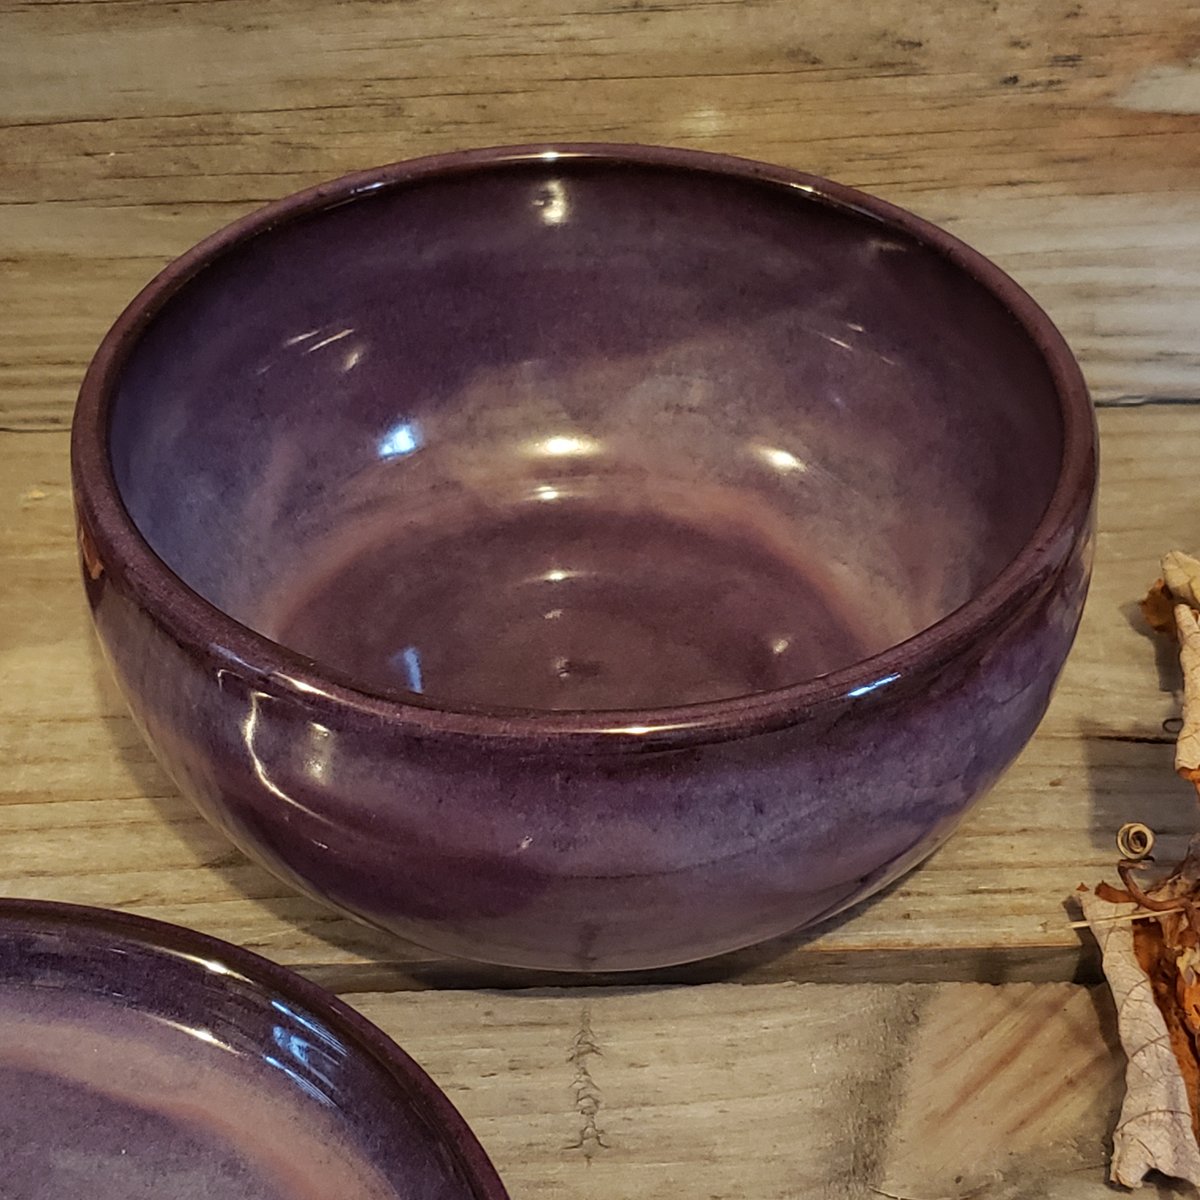 Image of 2-piece set - Deep Bowl and Plate: Huckleberry (Purple)